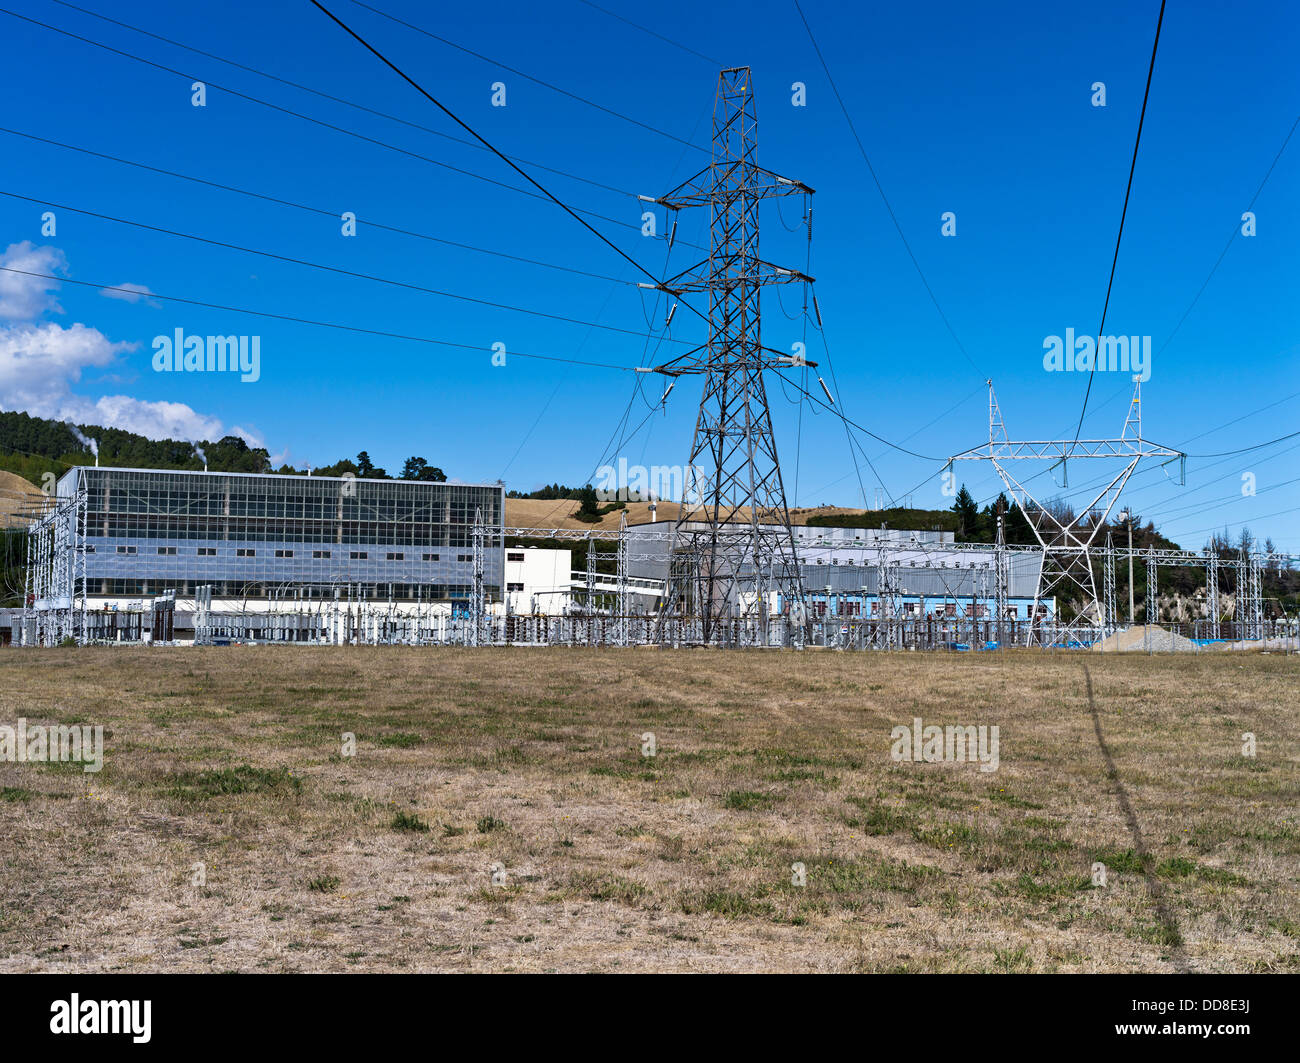 dh Wairakei power station TAUPO NEW ZEALAND Geothermal plant geo thermal energy resources Stock Photo